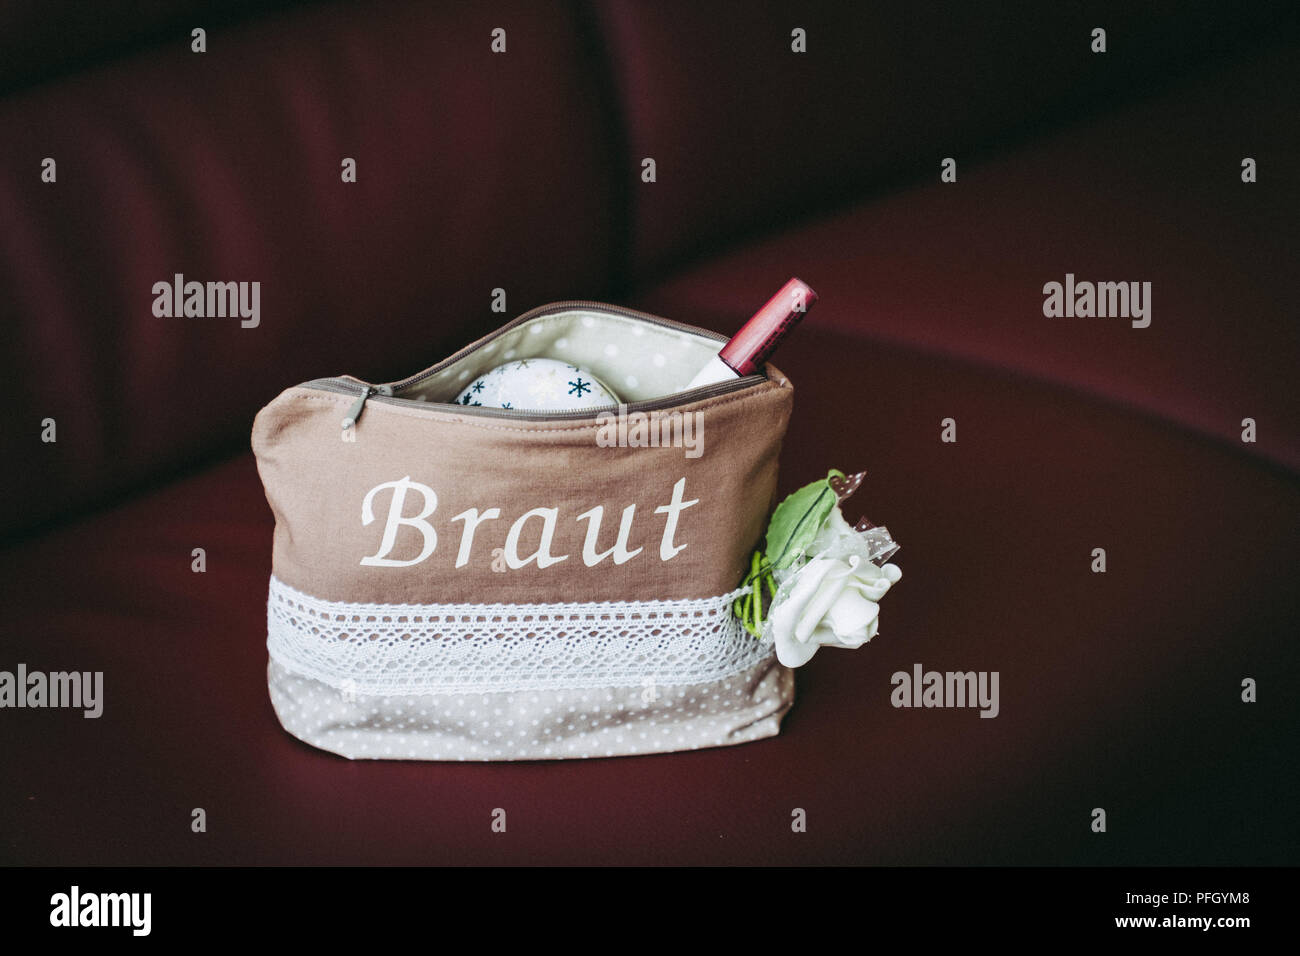 Cosmetic bag on the leather couch Stock Photo